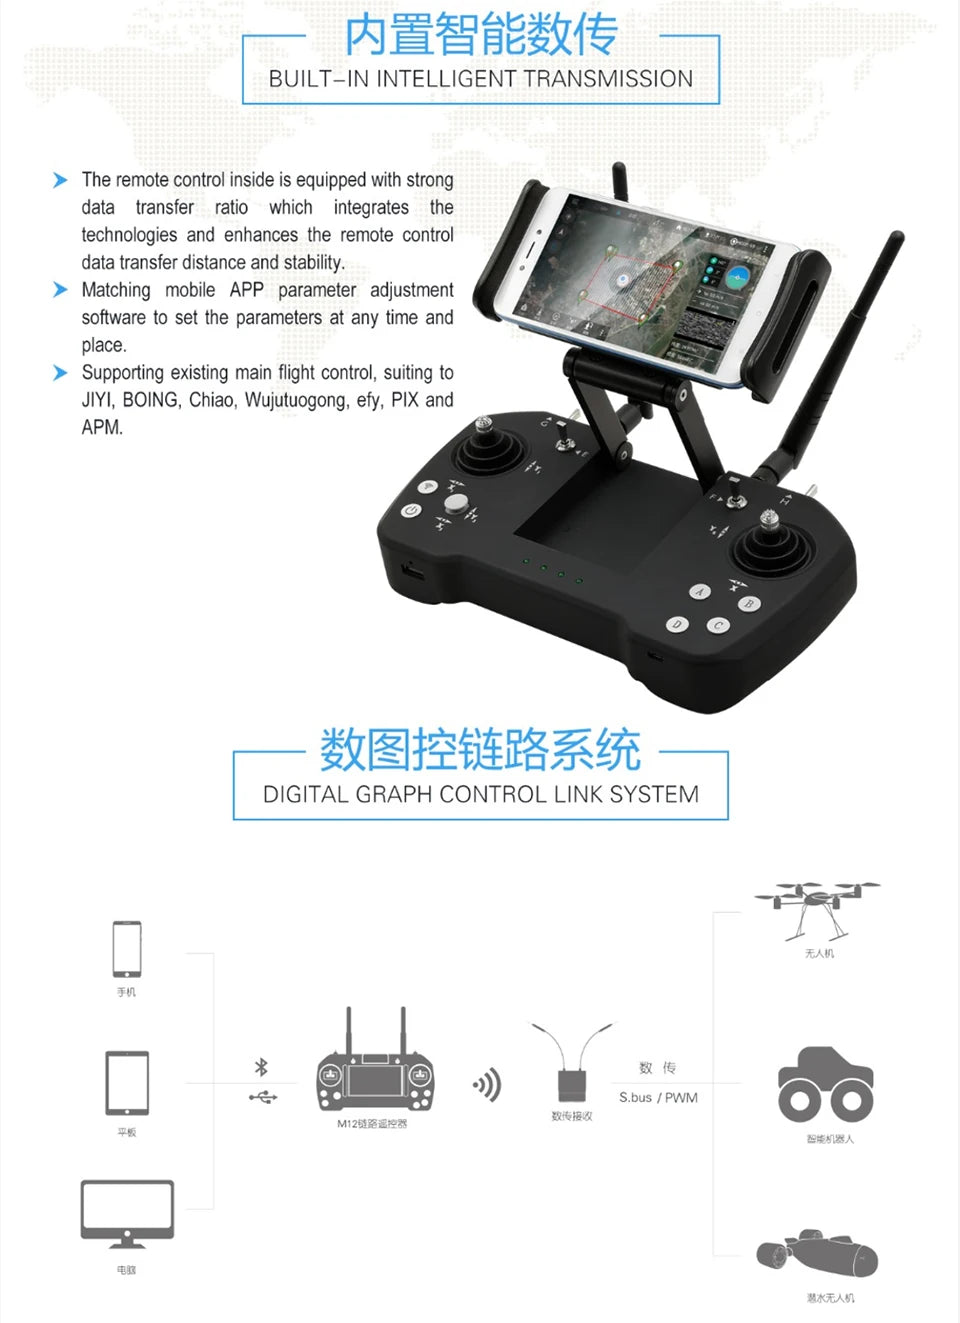 Skydroid M12 Pro Remote Controller, Smart remote control with advanced data transfer and real-time adjustments via app for major flight controllers.